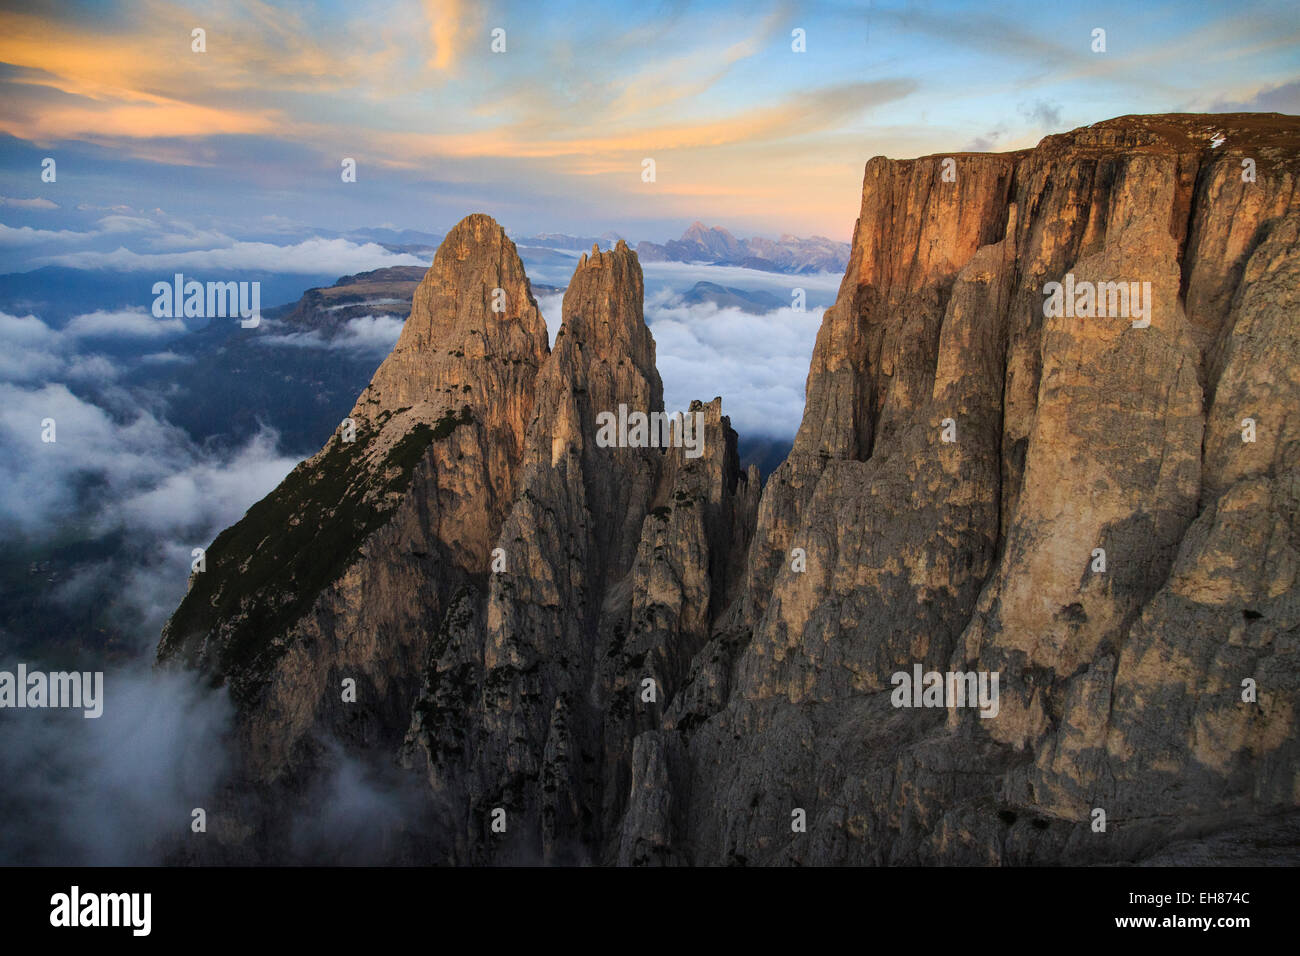 The Sciliar, unique for its distincitive pinnacles, the Santner and Euringer peaks, South Tyrol, Italy, Europe Stock Photo